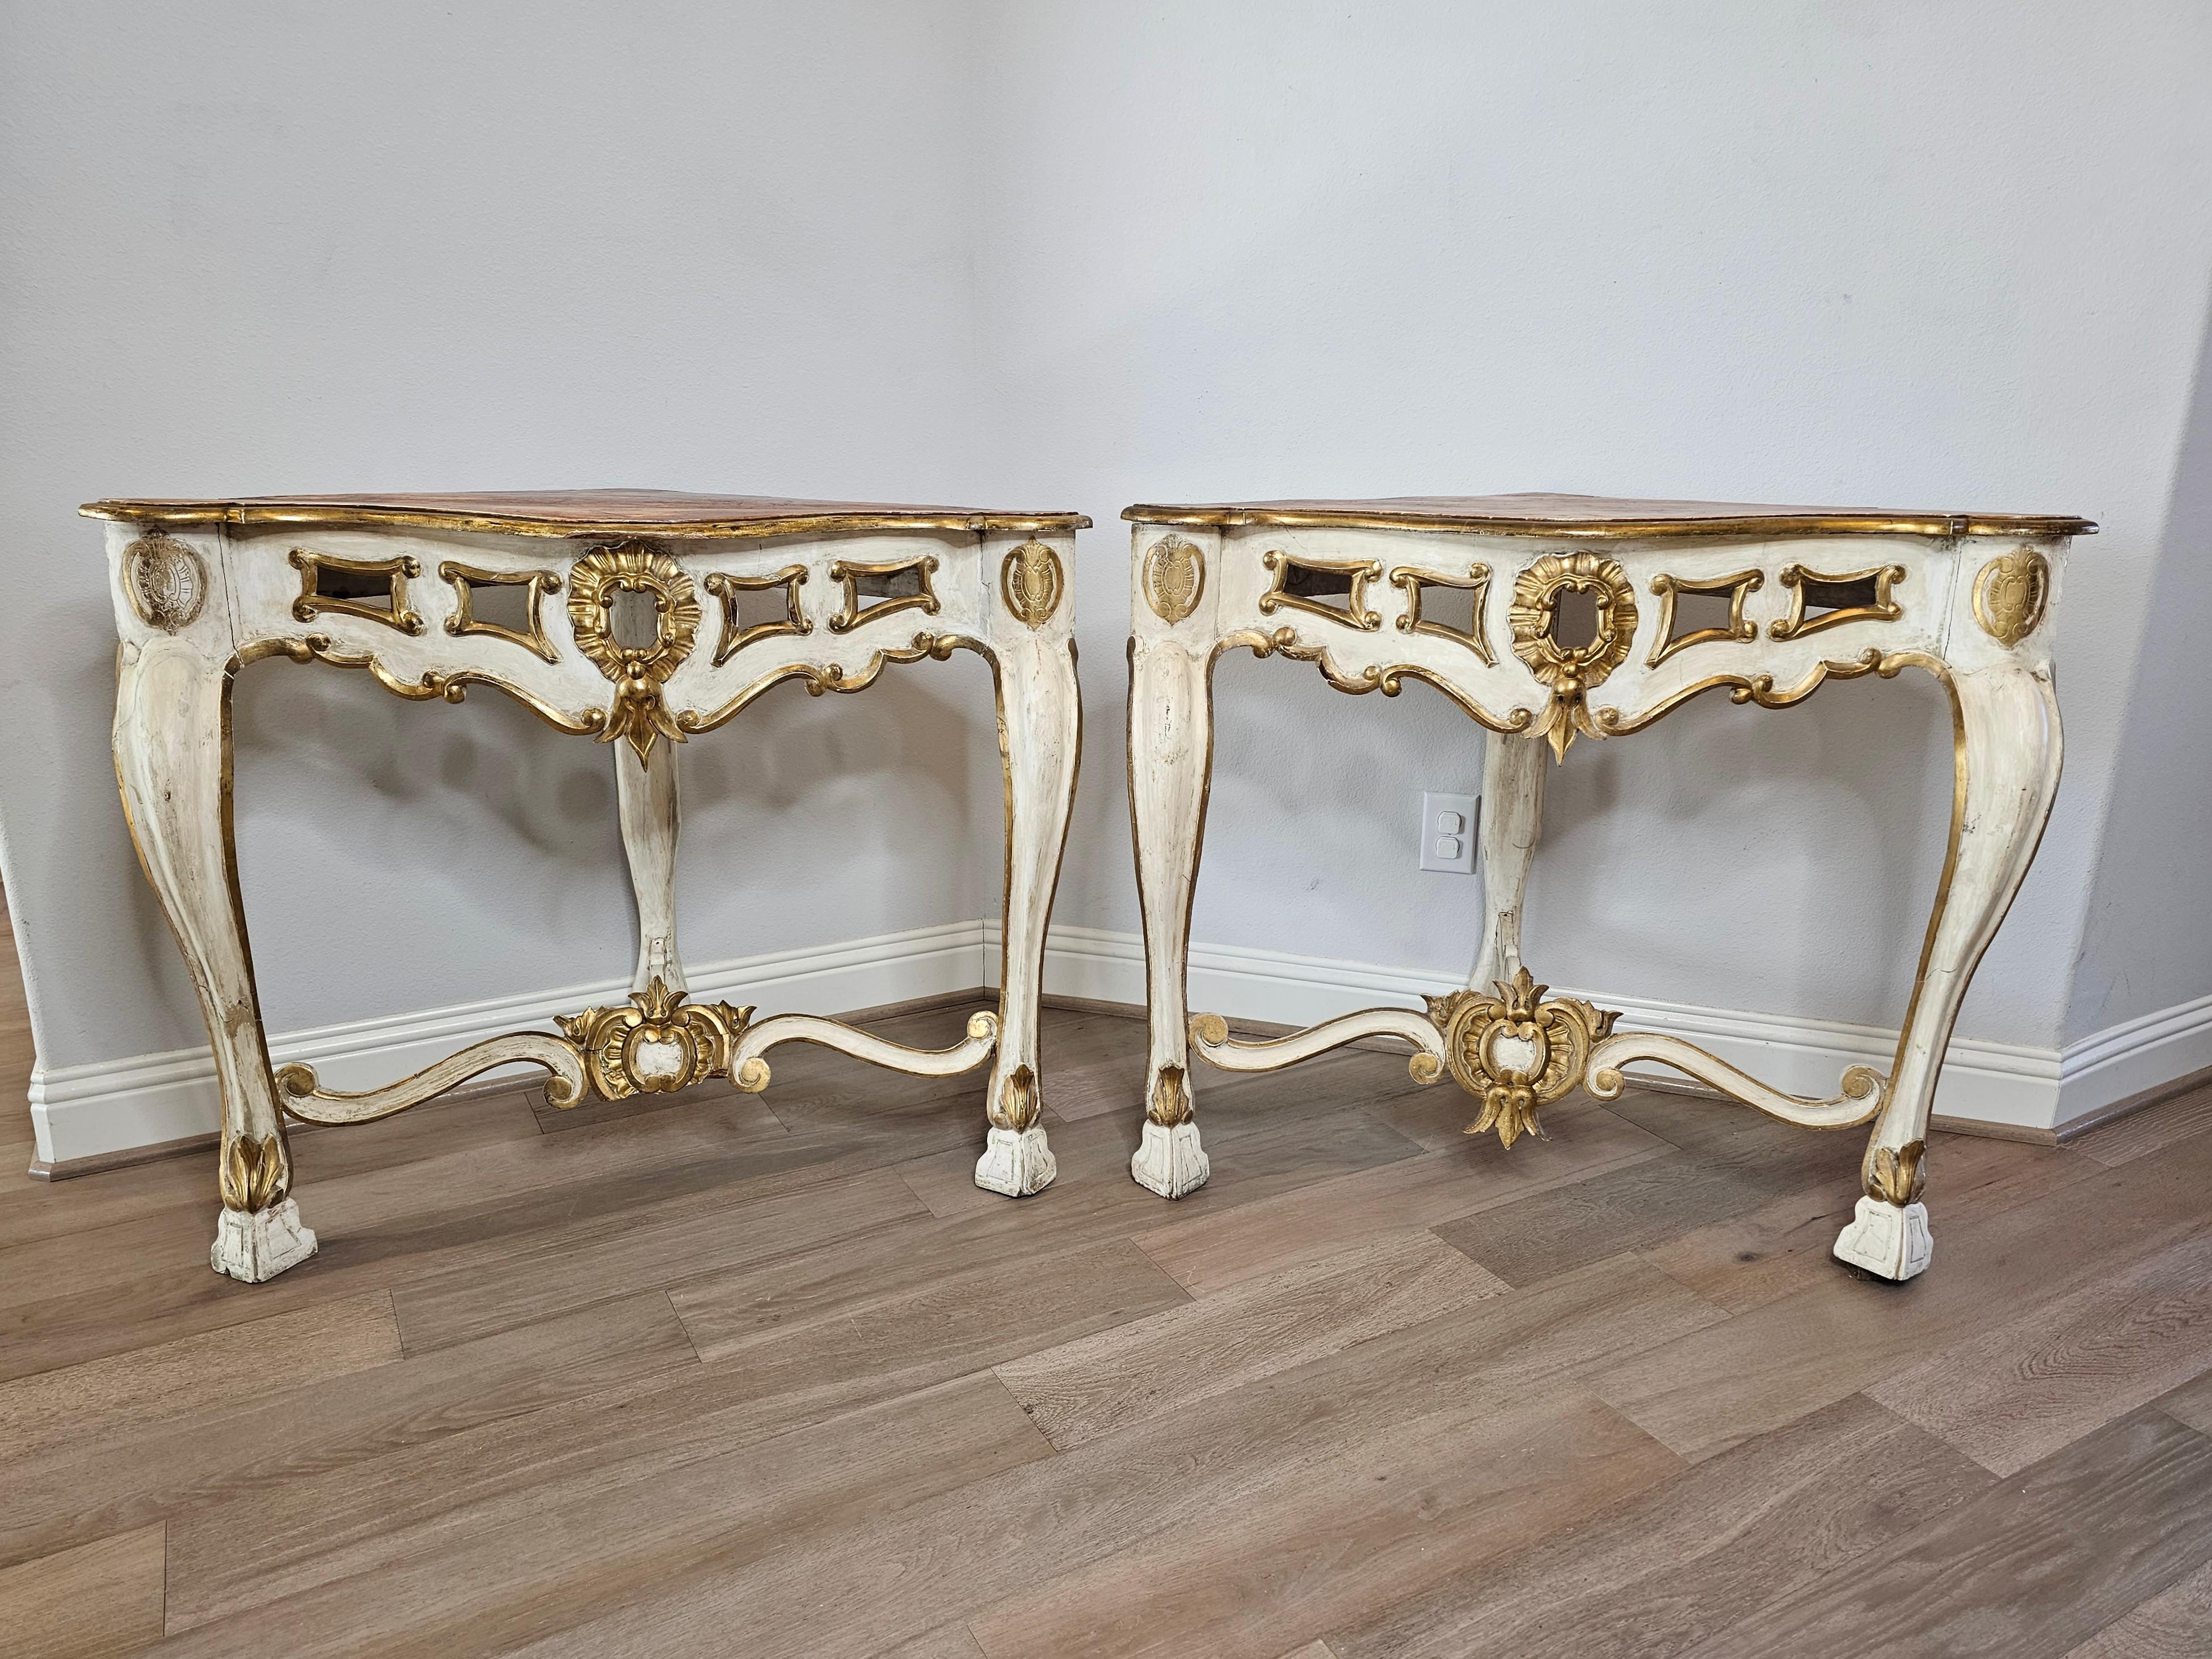 A stunning pair of large antique Italian Baroque carved faux marble painted parcel gilt corner console tables. circa 1740

Hand-crafted in Italy in the 18th century, styled in luxurious period Louis XV (1715-1774) taste, featuring a triangular